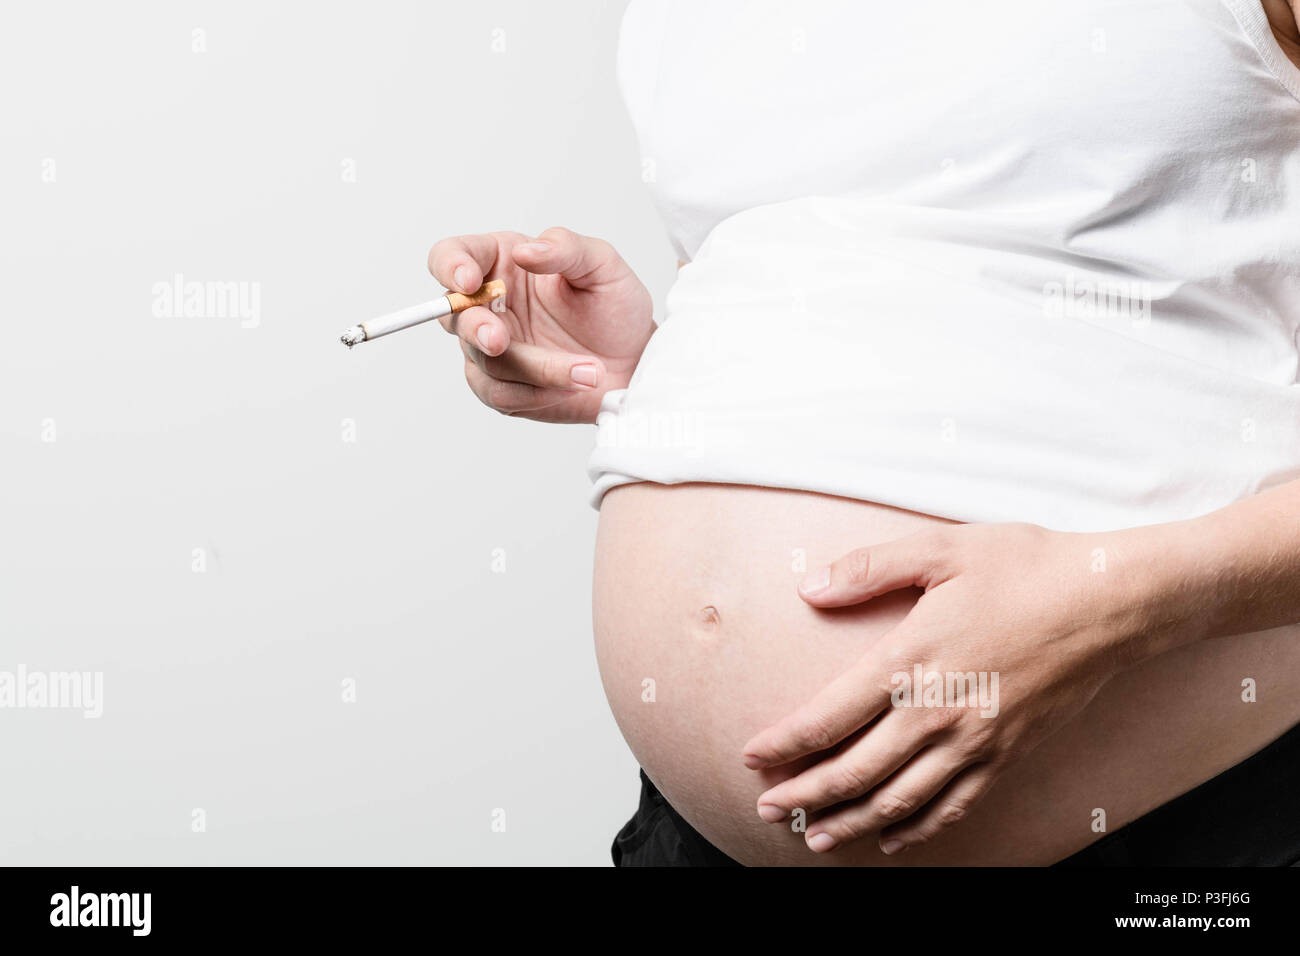 Pregnant woman breaks cigarette in half, says no to smoking Stock Photo by  ©SIphotography 51627555